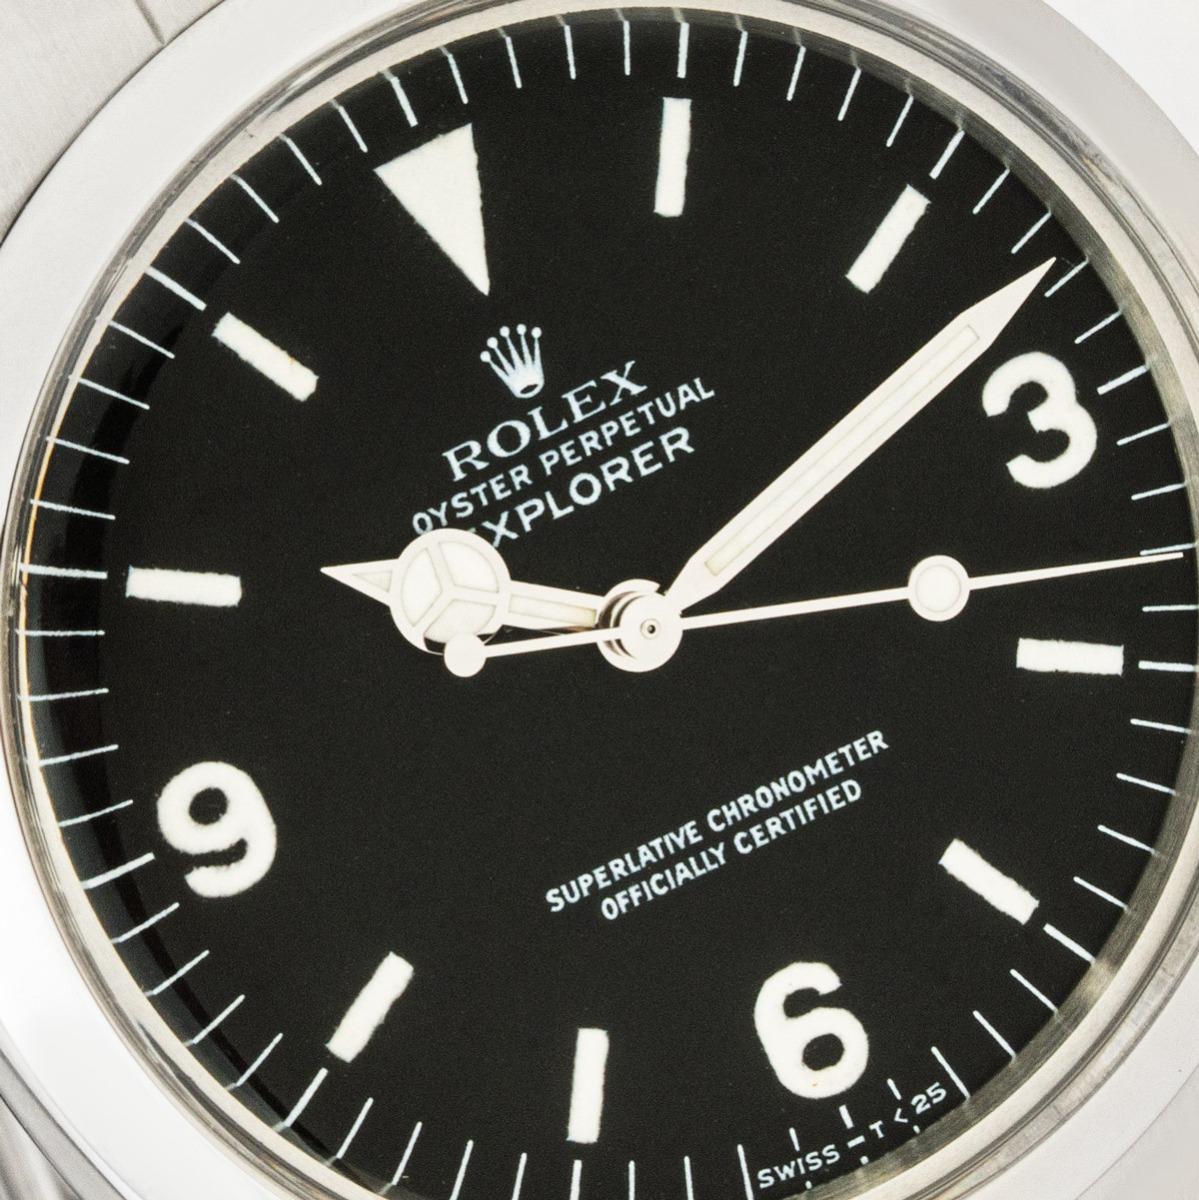 Rolex Explorer Mark III Dial 1016 In Excellent Condition For Sale In London, GB